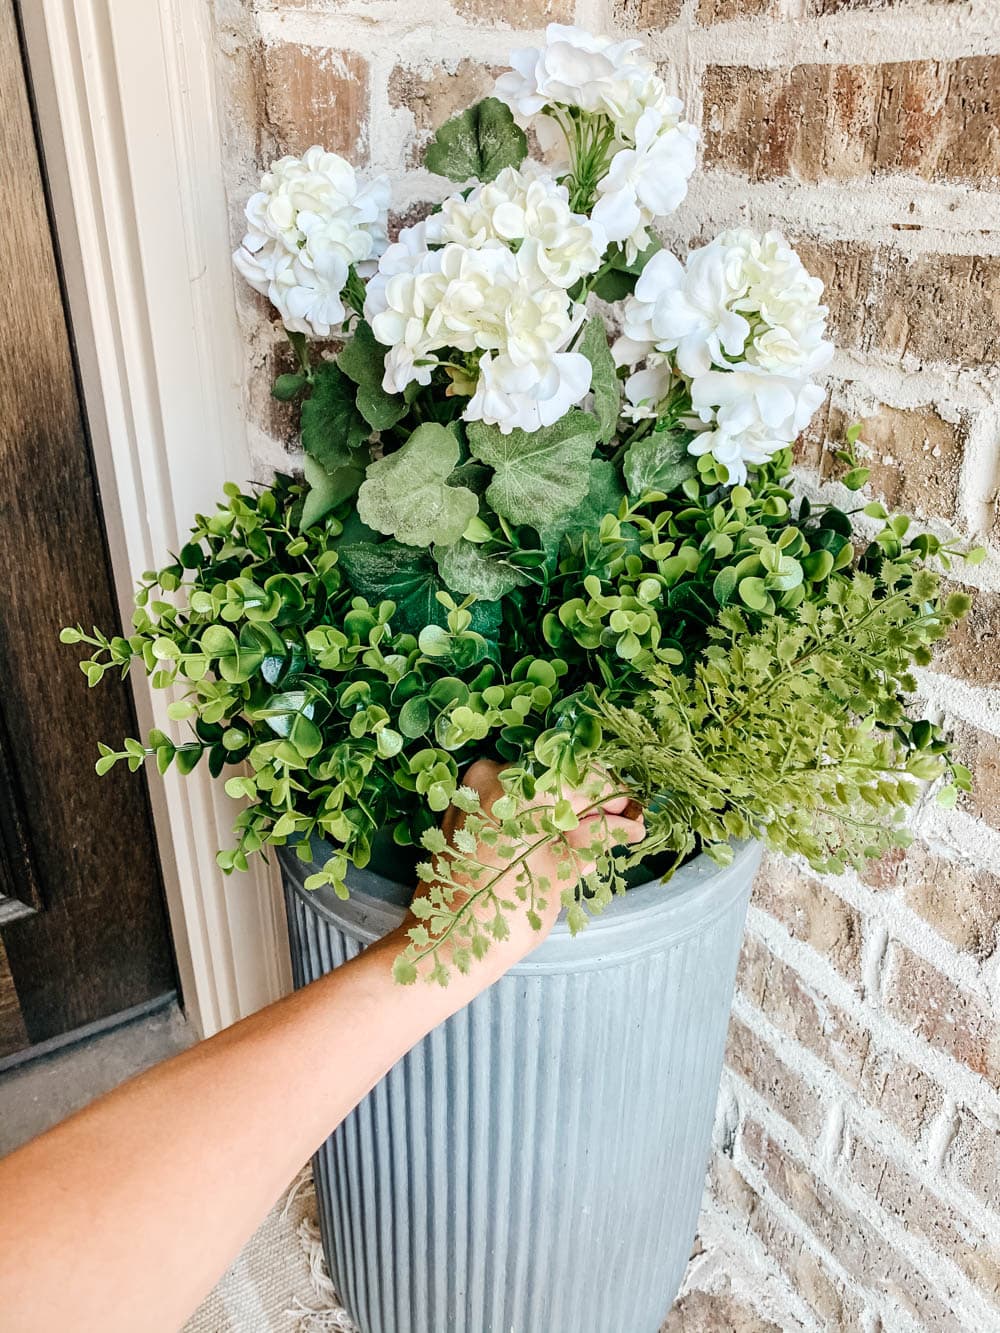 Tutorial on how to arrange and use artificial flowers and plants in outdoor planters. #ABlissfulNest #gardening #outdoorplanters